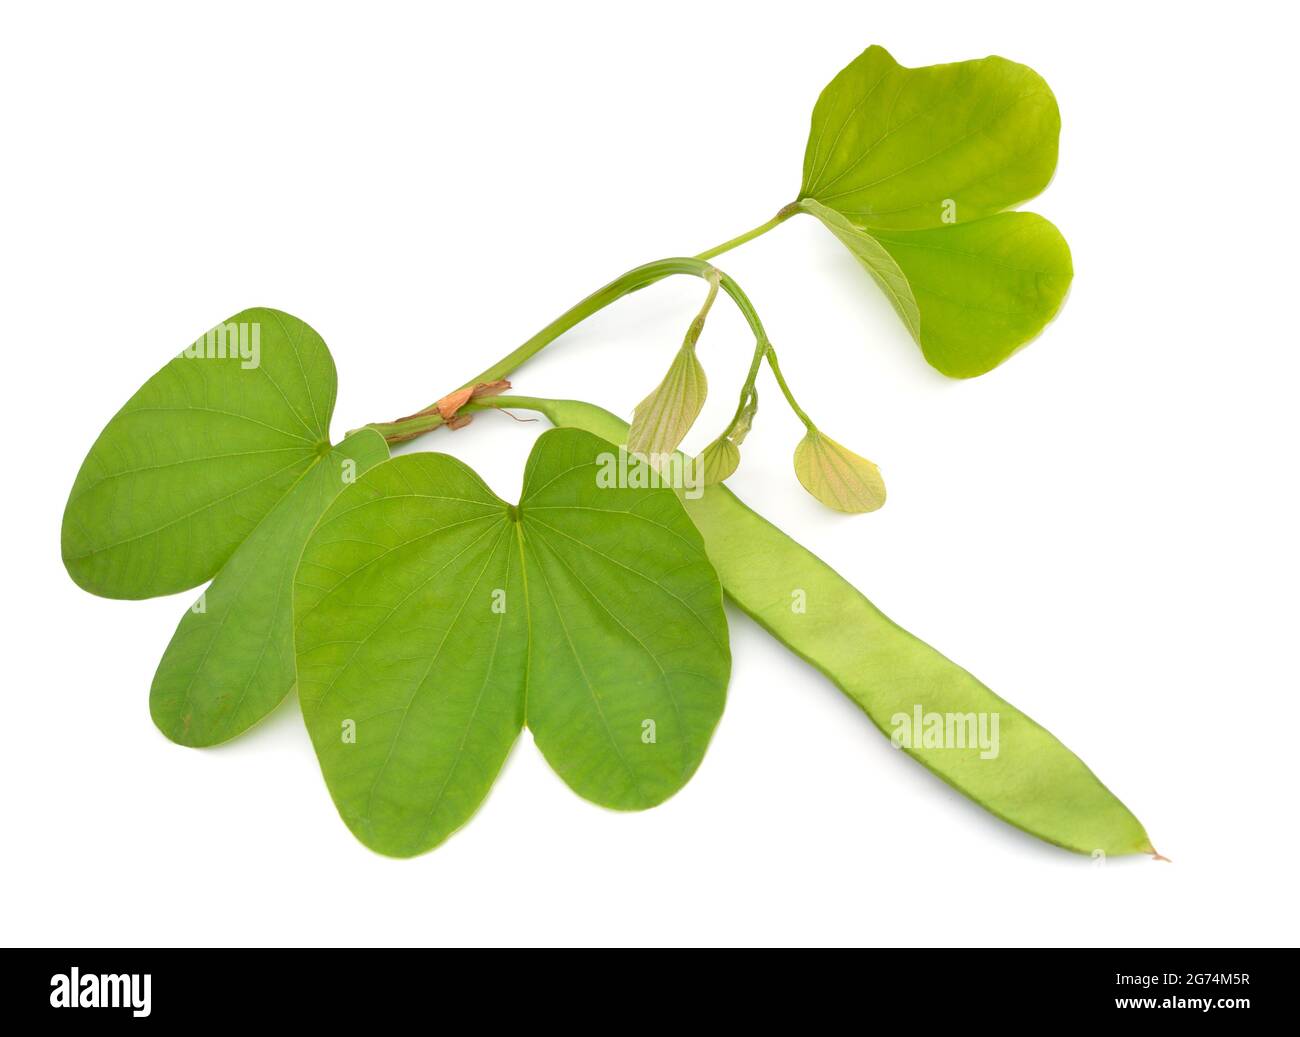 Bauhinia, orchid trees. Other common names include mountain ebony and kachnar. Isolated on white background. Stock Photo